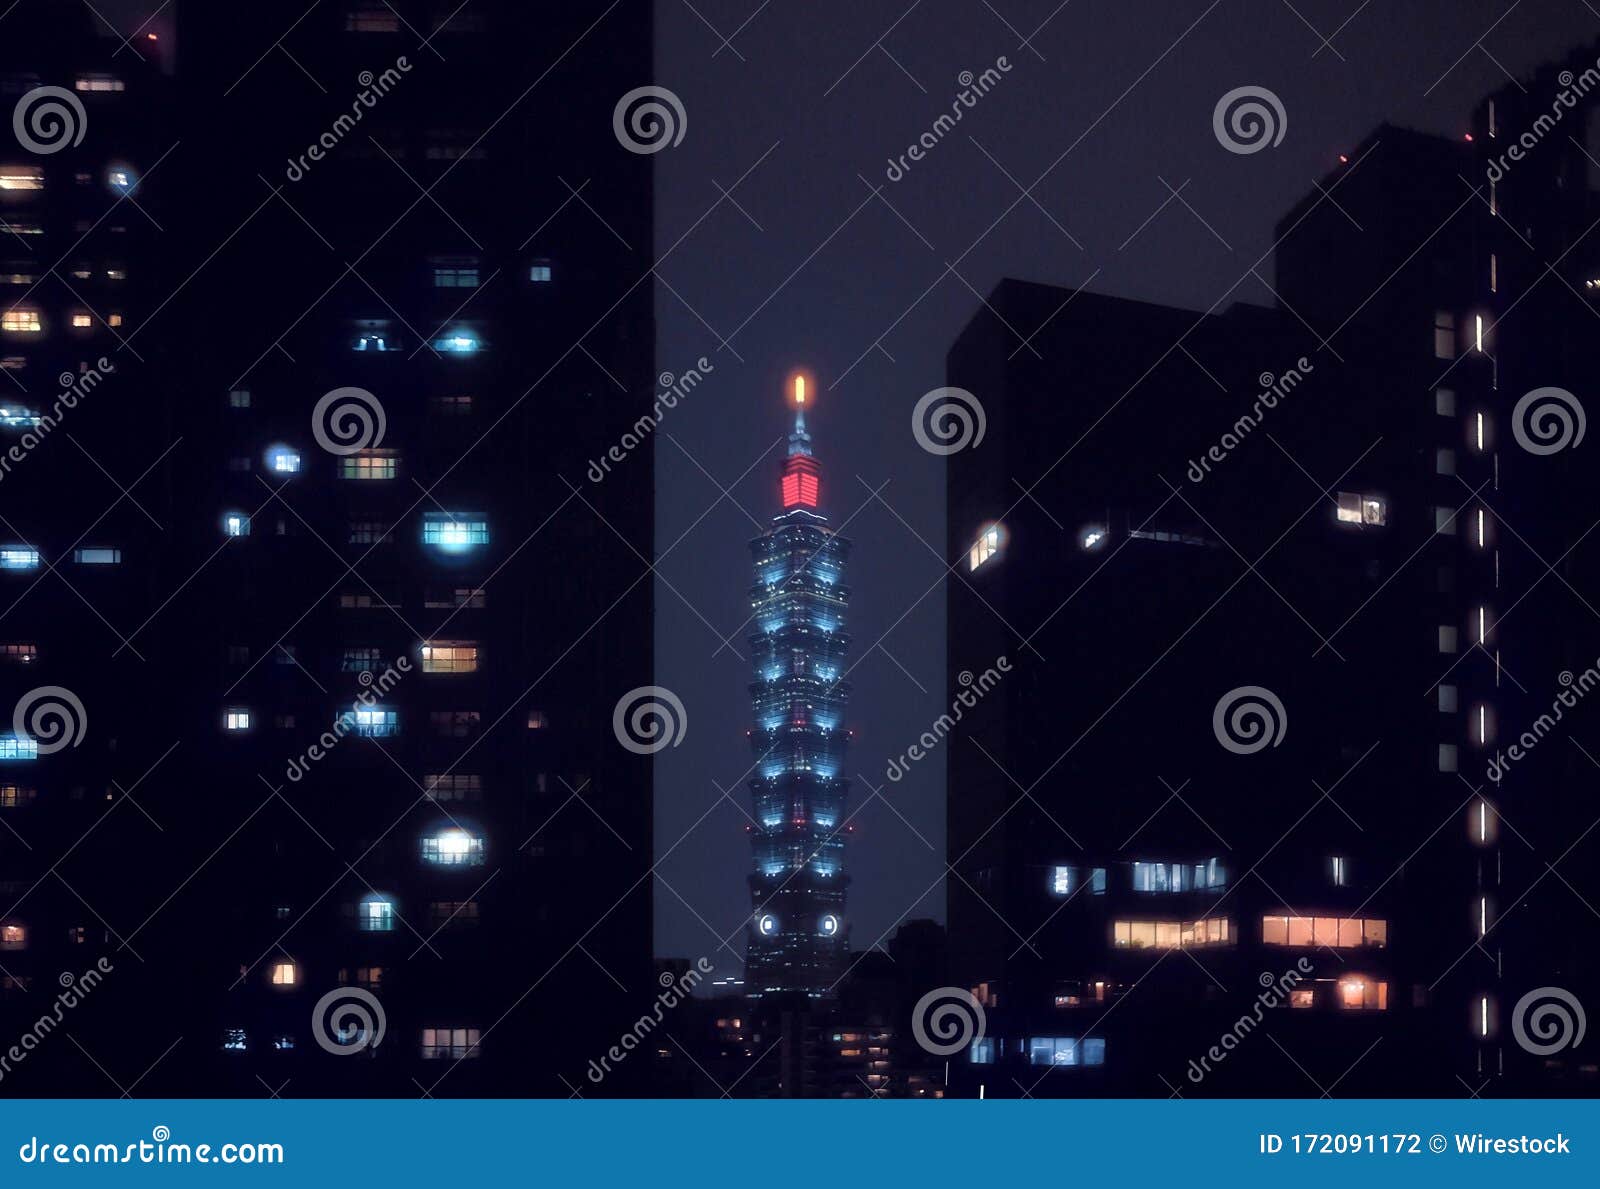 skyscraper with a red light in the top taipei, taiwan at night